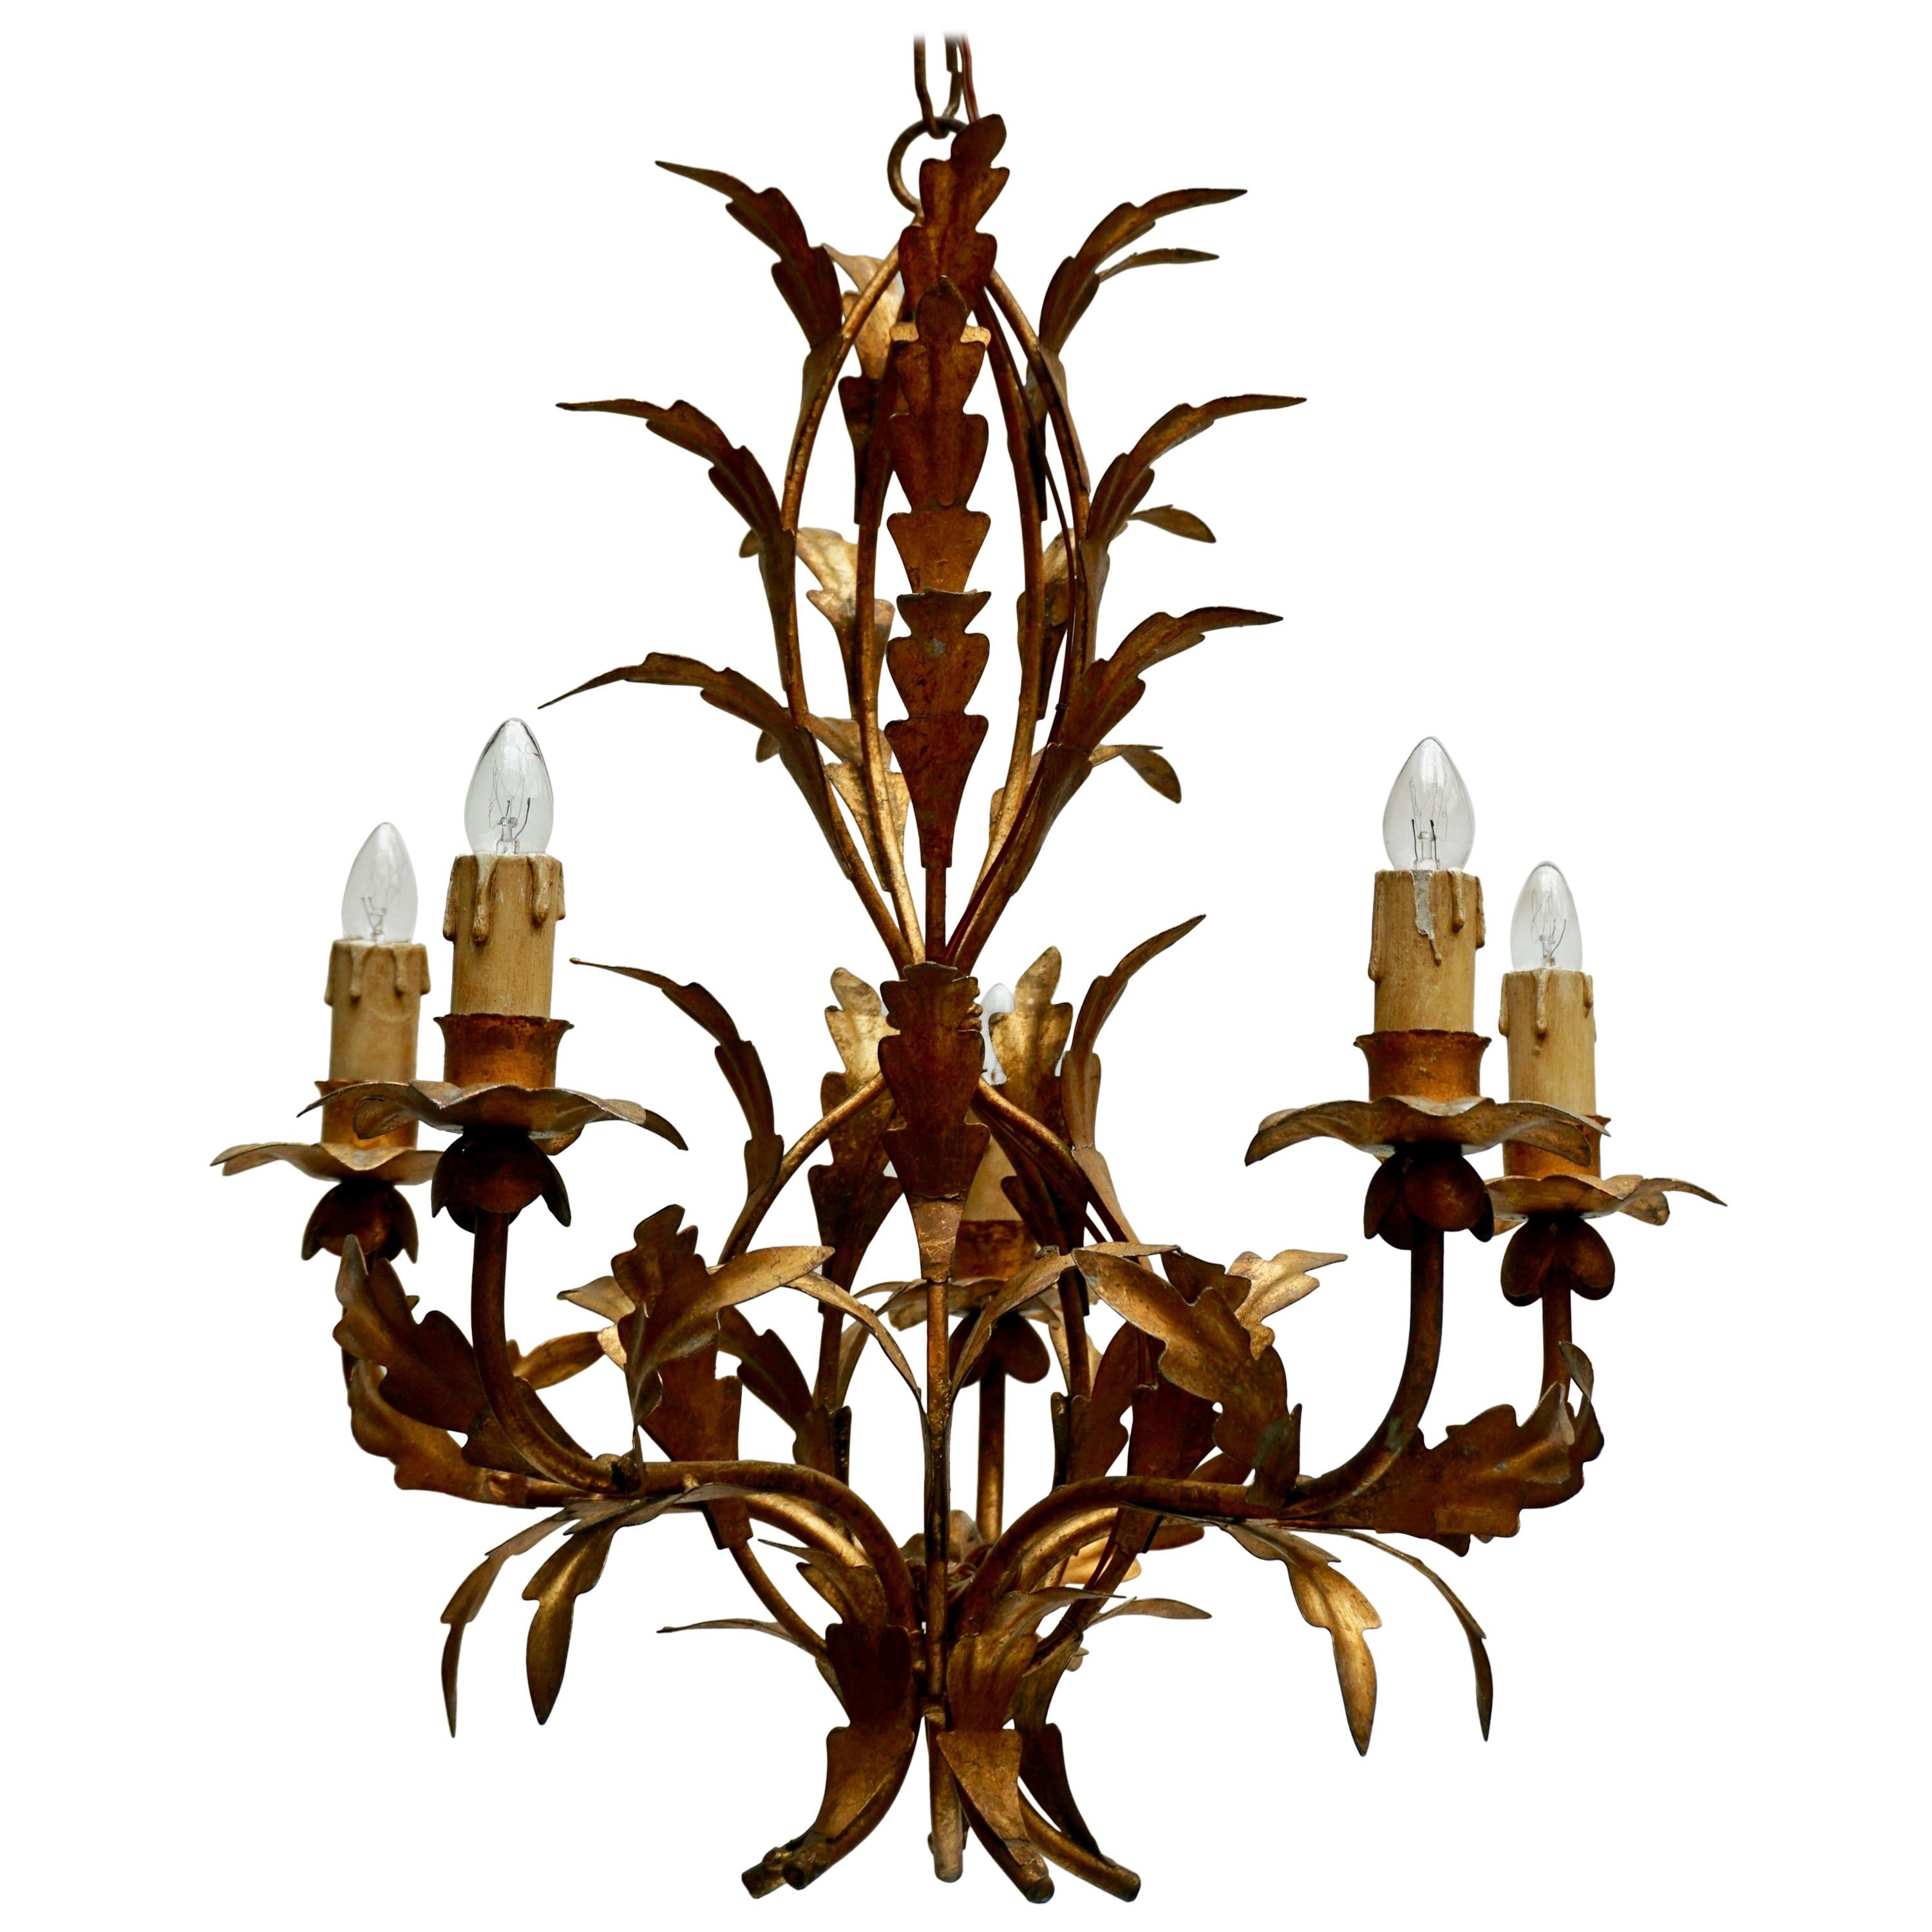 Vintage French Gilded Iron Tôle Flower Chandelier, circa 1940